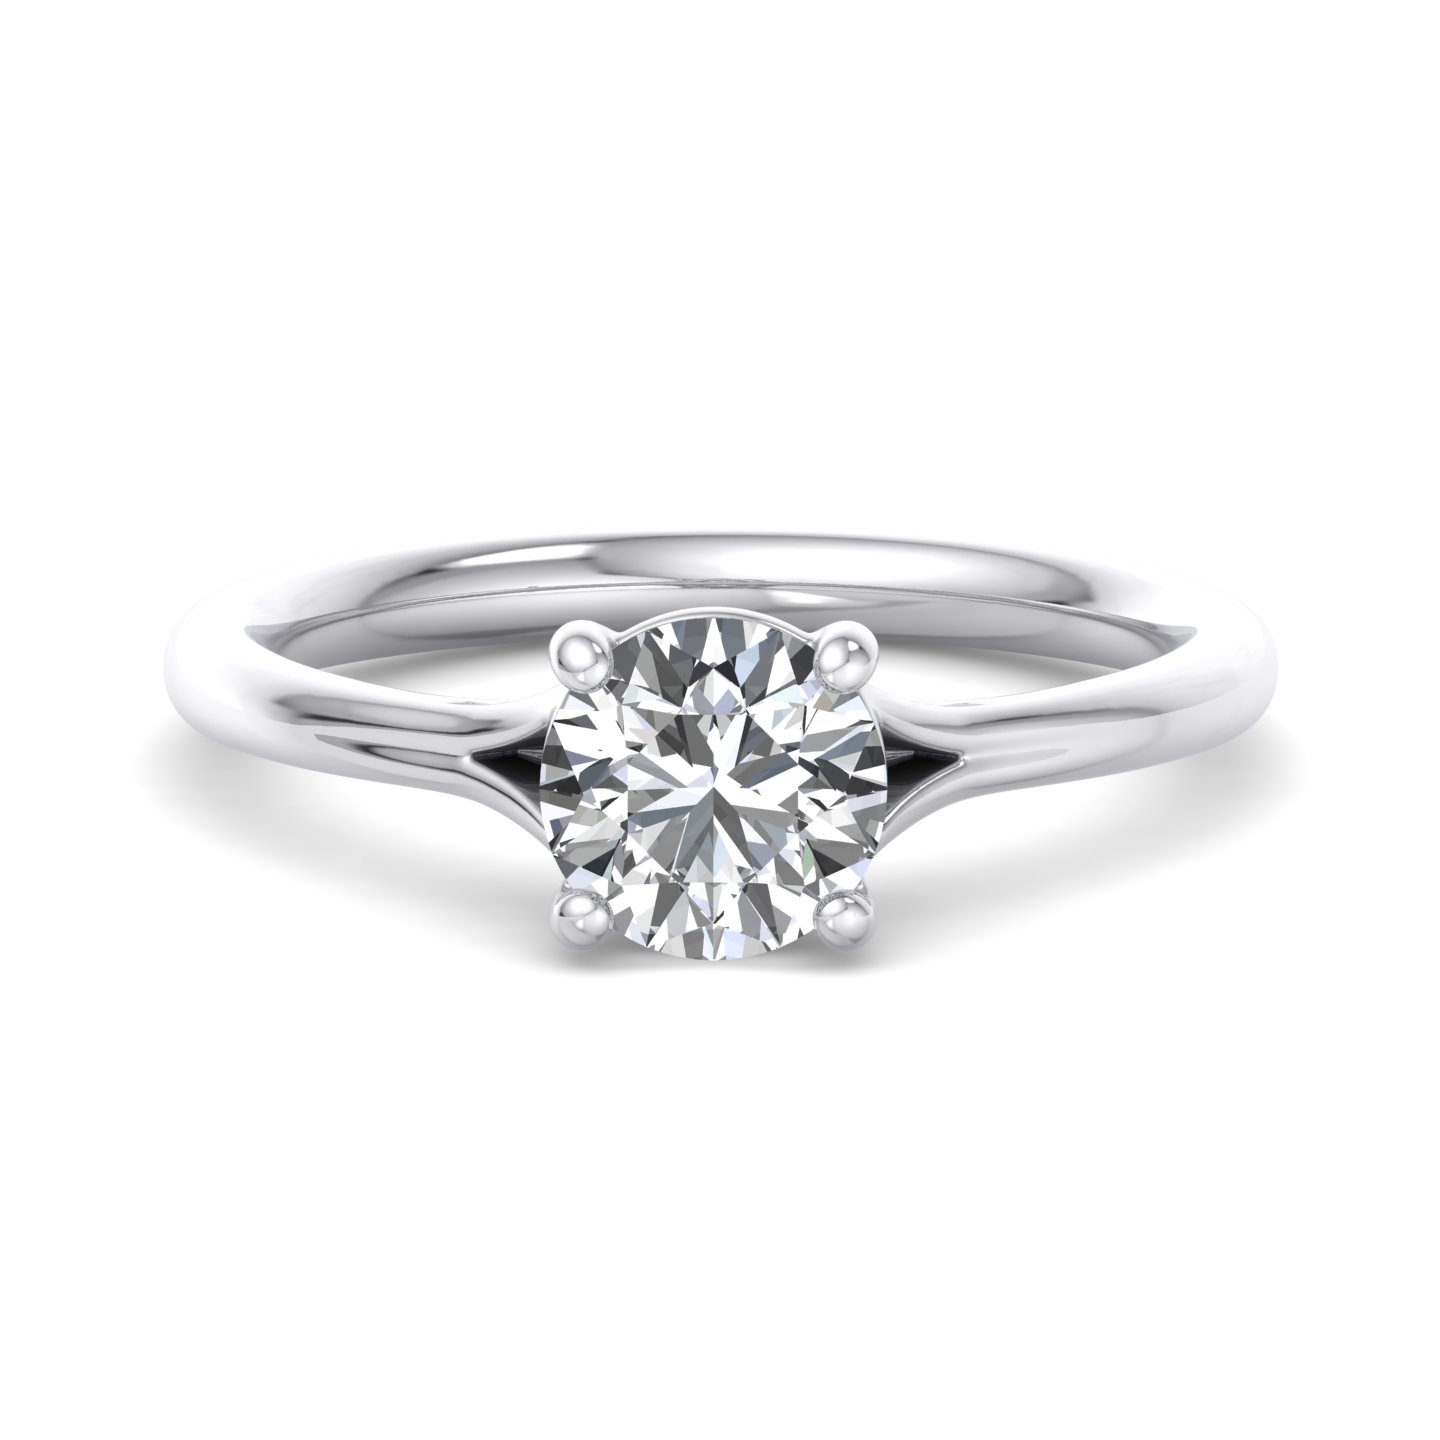 Isabella 4 prong solitaire with Split shank